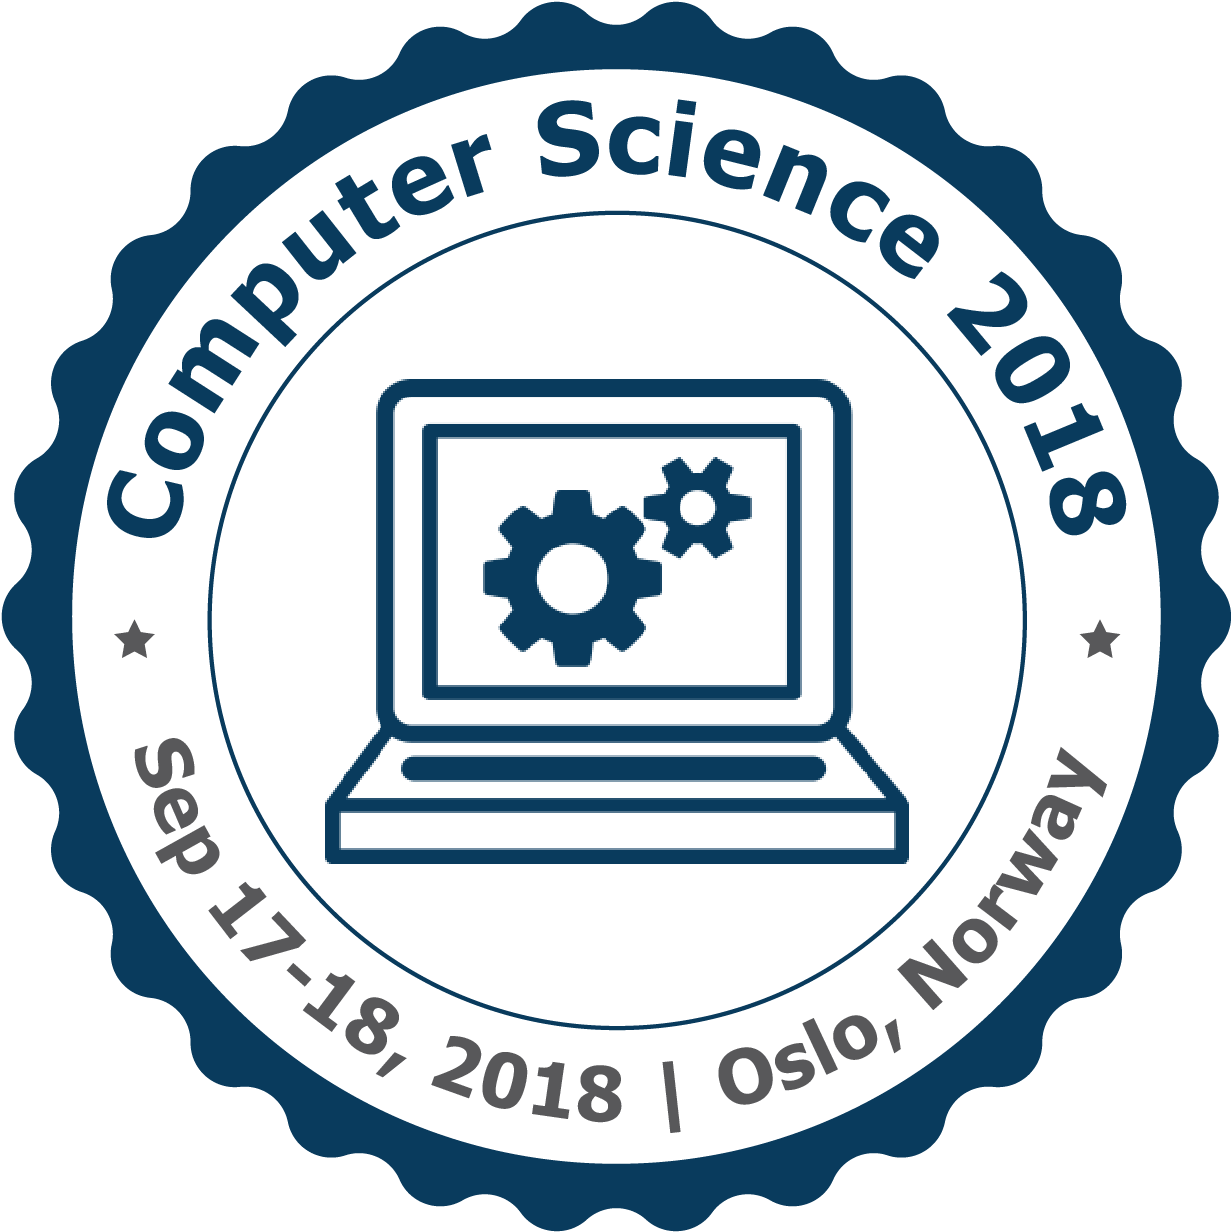 Top European Conference On Computer Science And Engineering - Climate Change Summit 2018 (1230x1296), Png Download